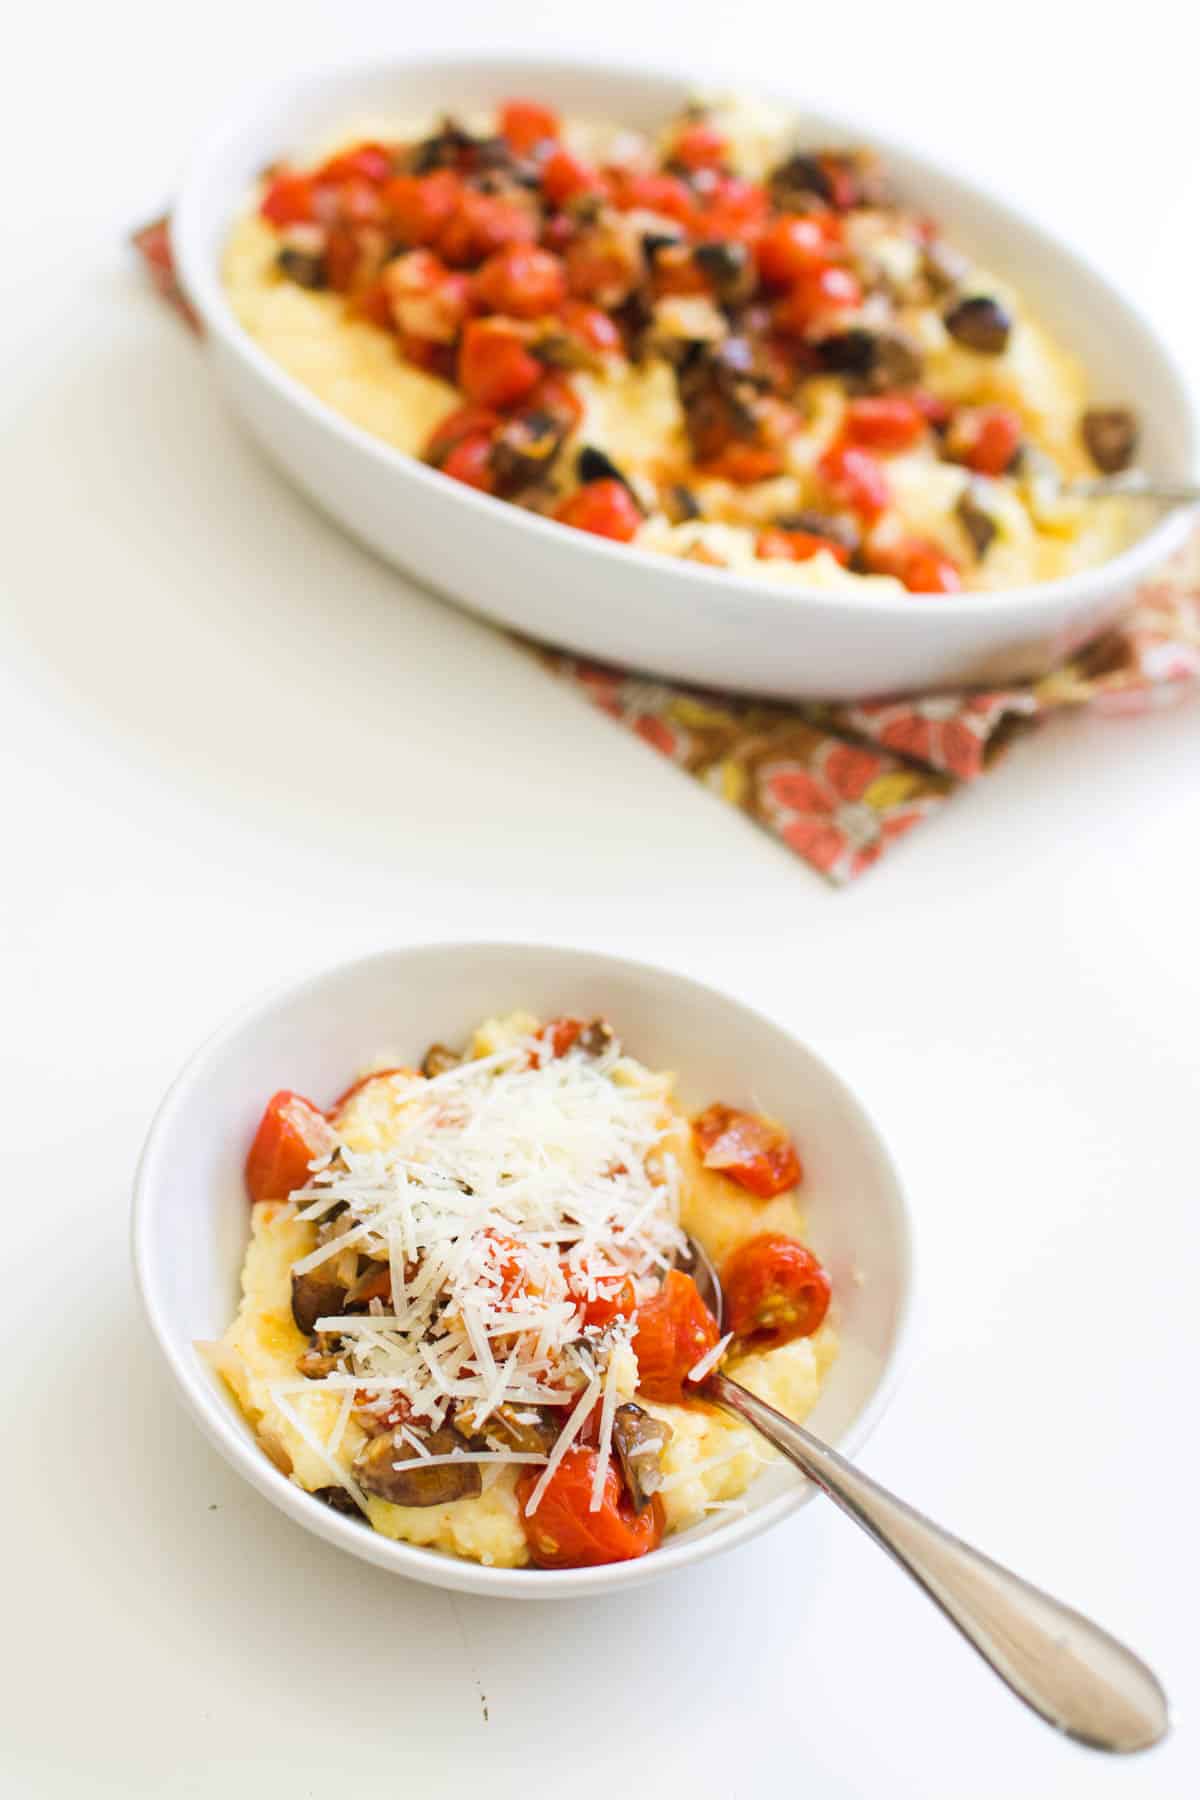 A small dish of polenta topped with roasted mushrooms and tomatoes and parmesan cheese.